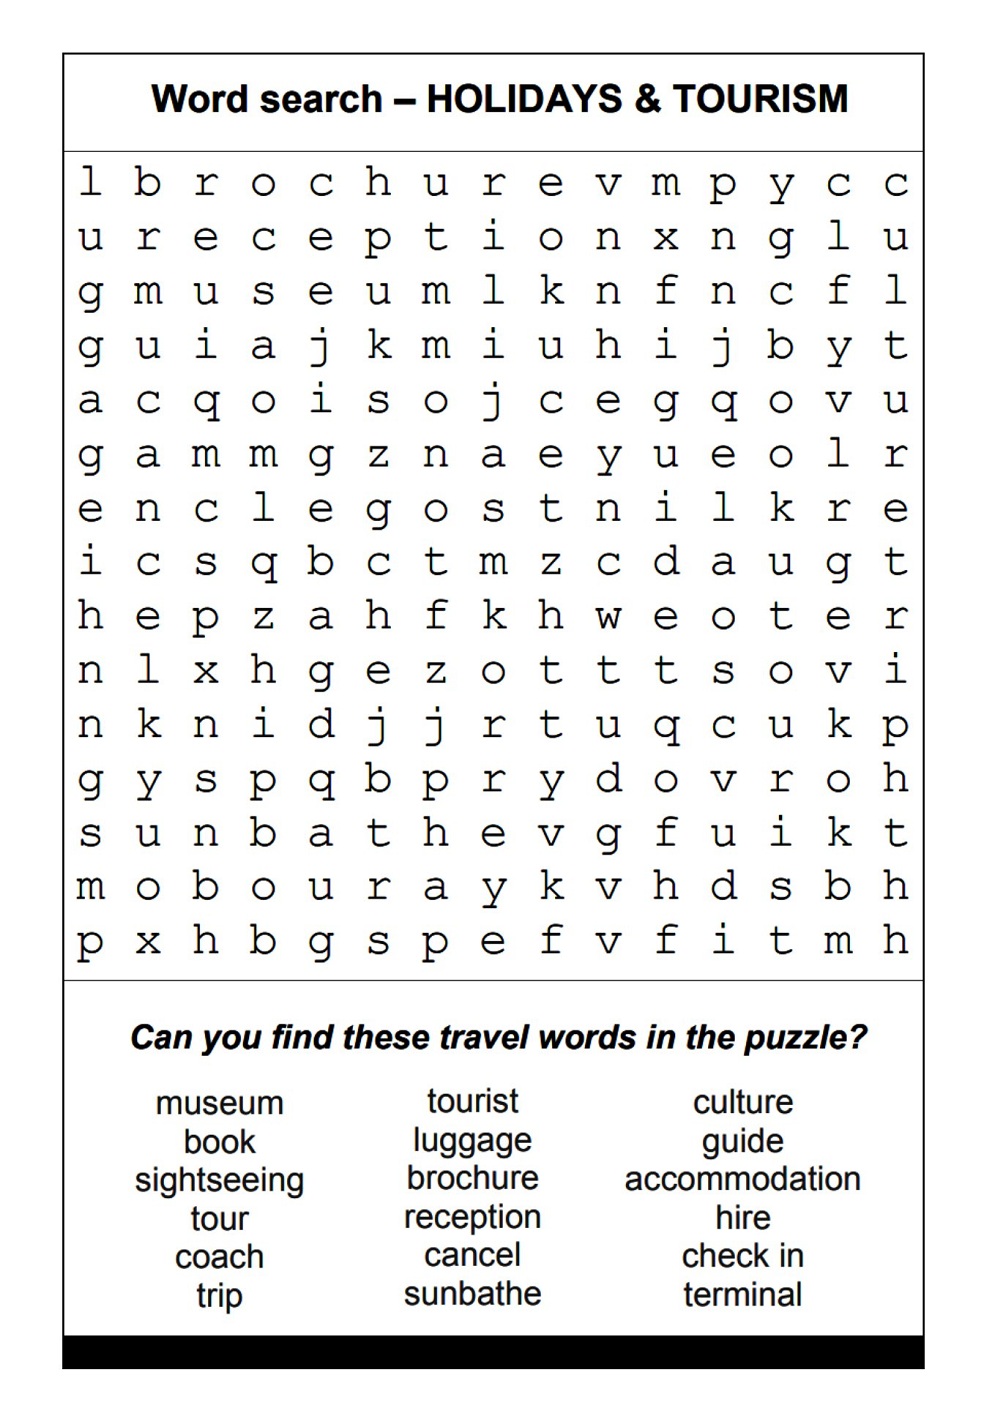 Holidays Word Search Puzzle